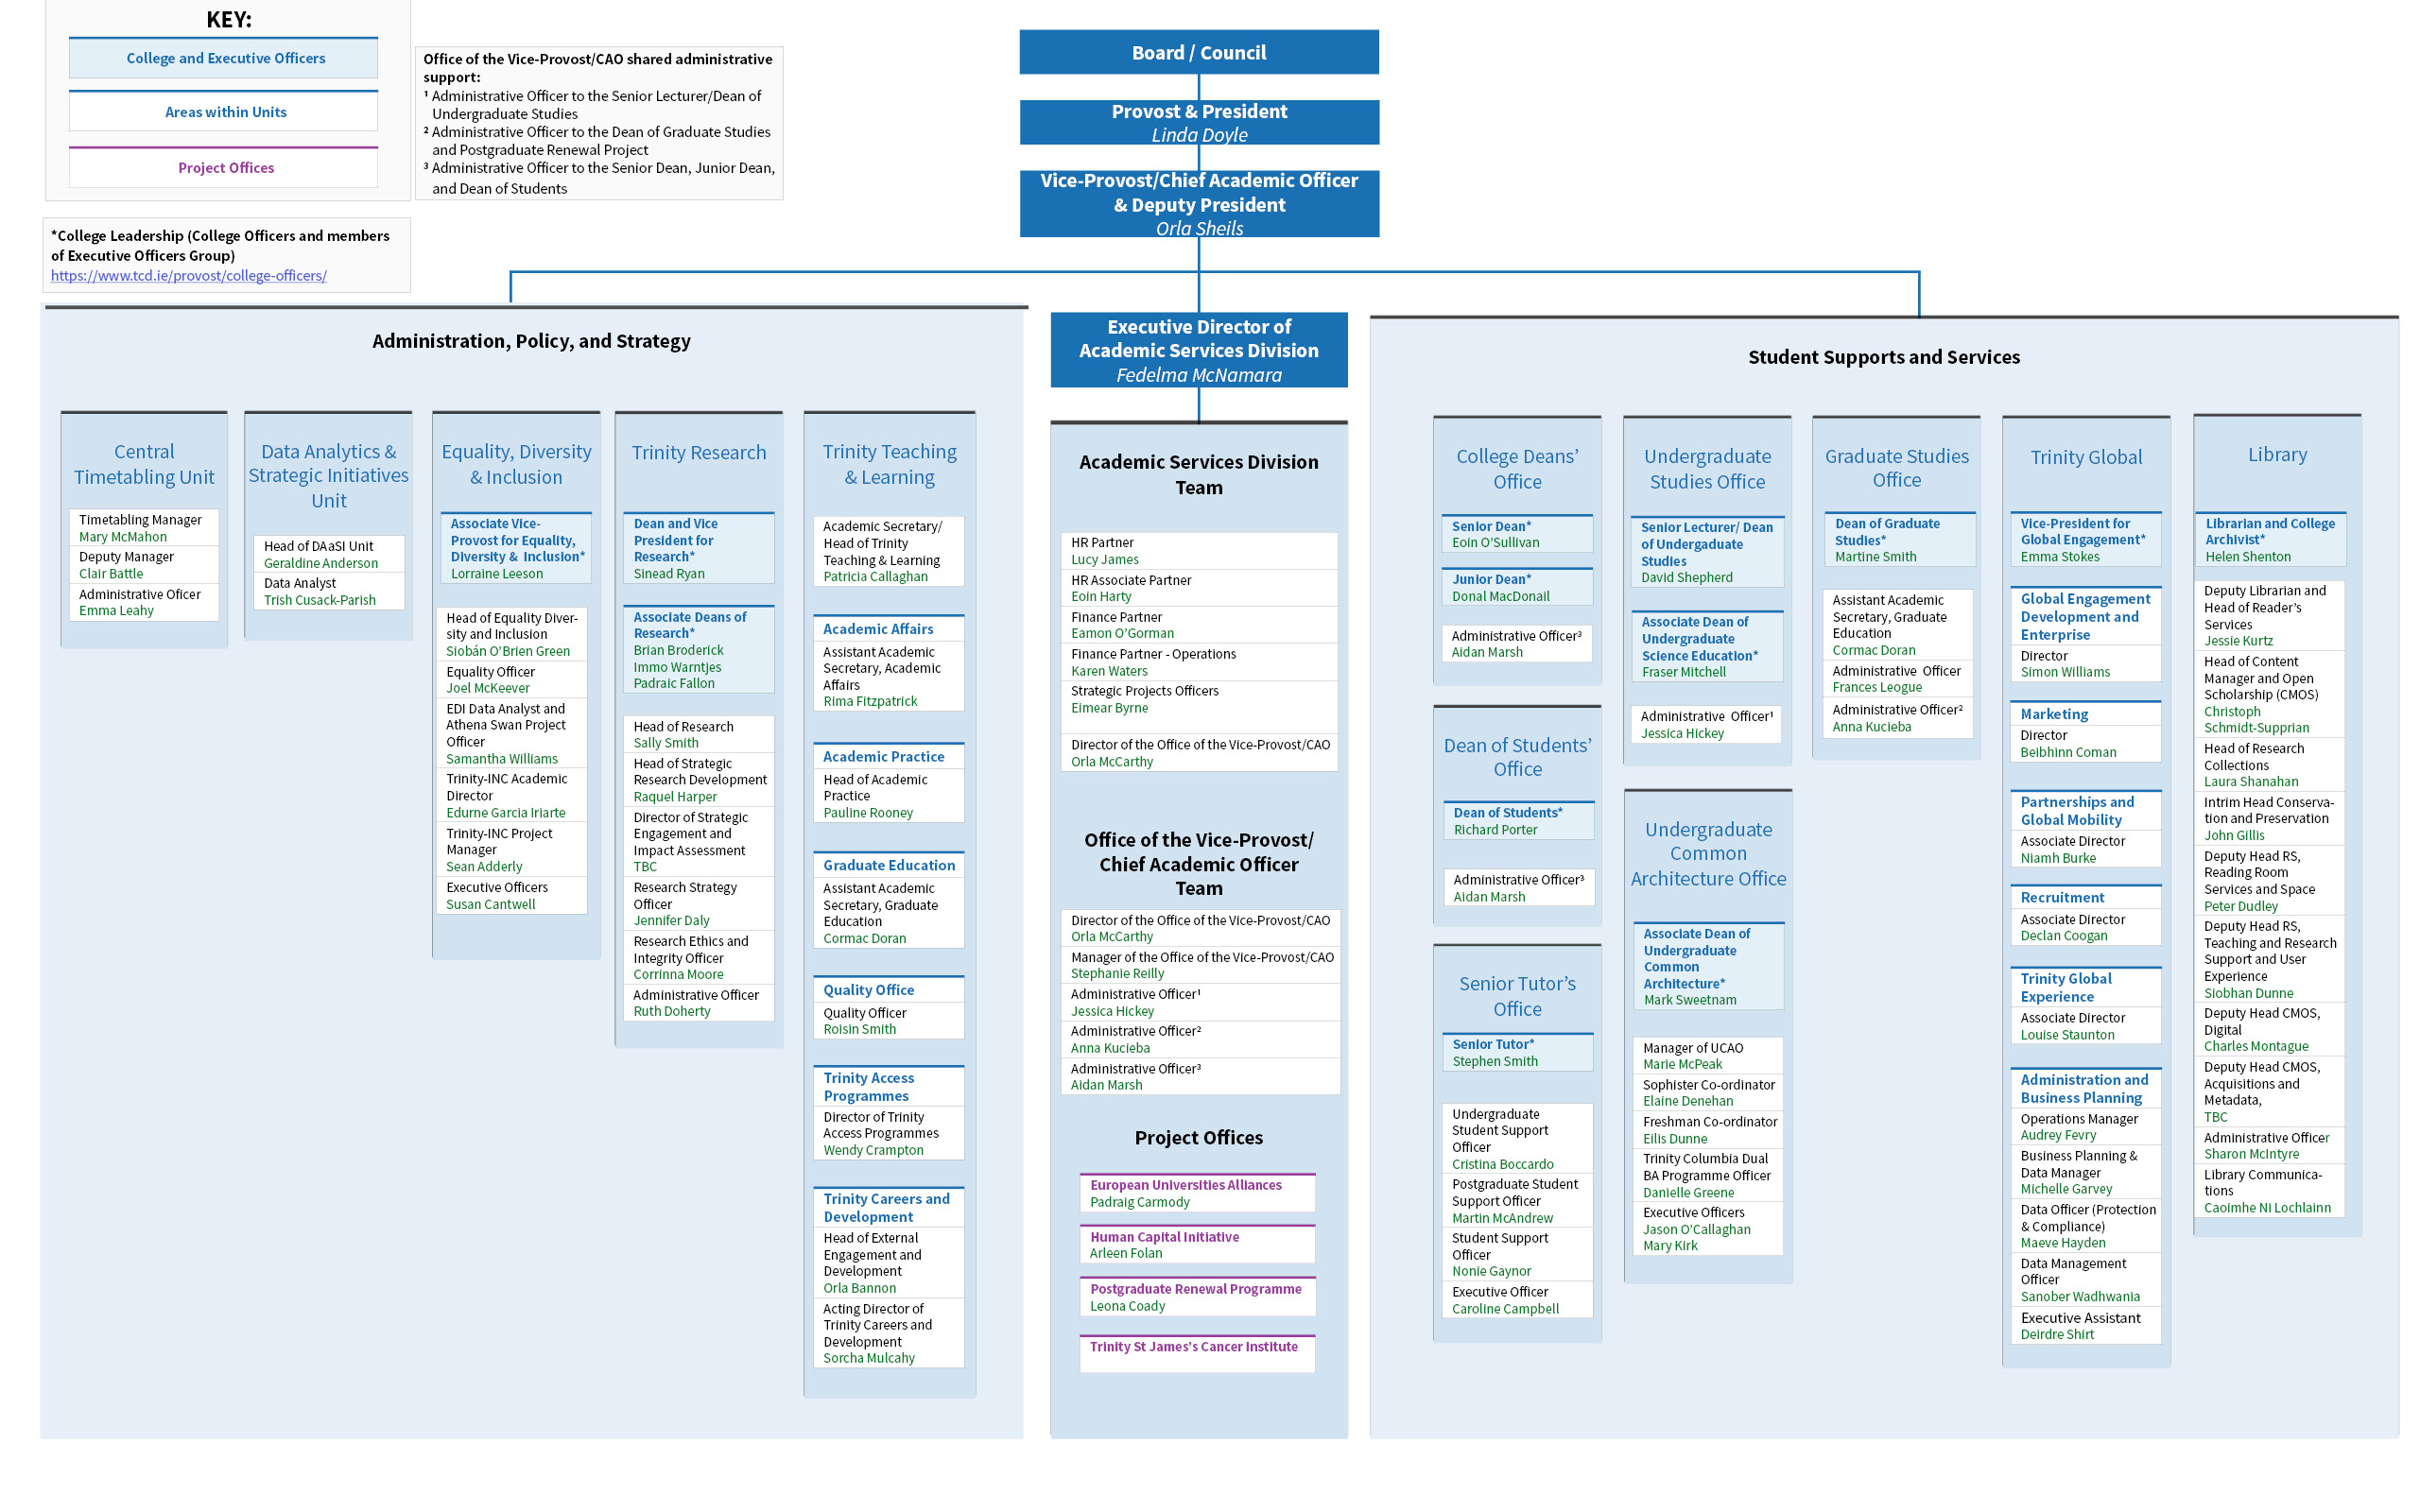 Organisation chart of Academic Services Division